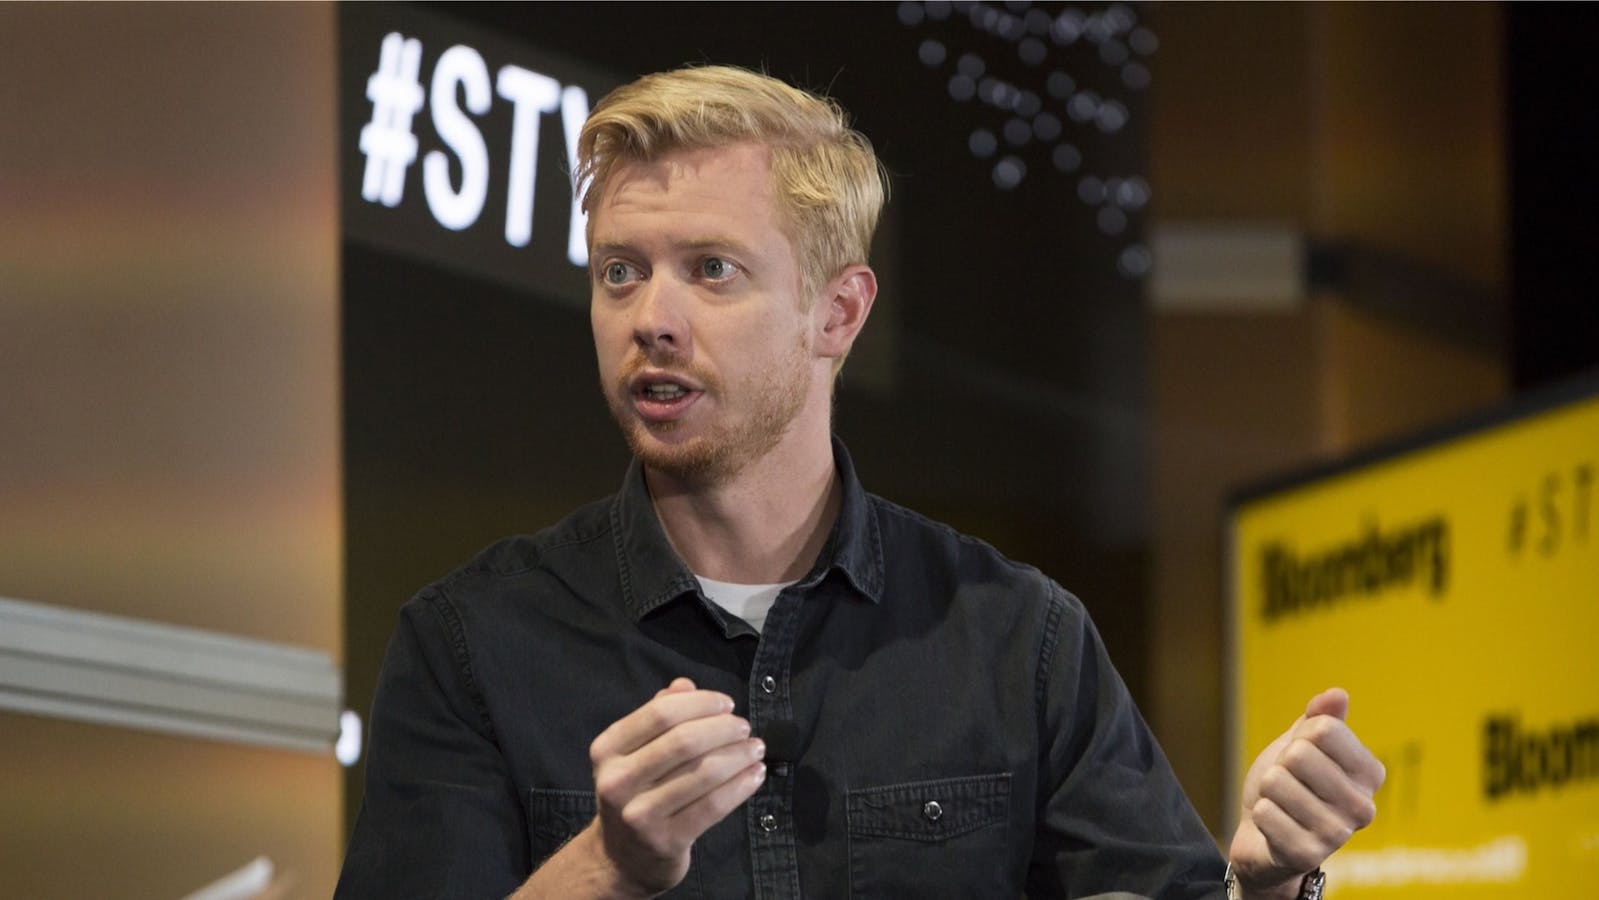 Steve Huffman, chief executive officer and co-founder of Reddit Inc., in 2018. Photo: Bloomberg